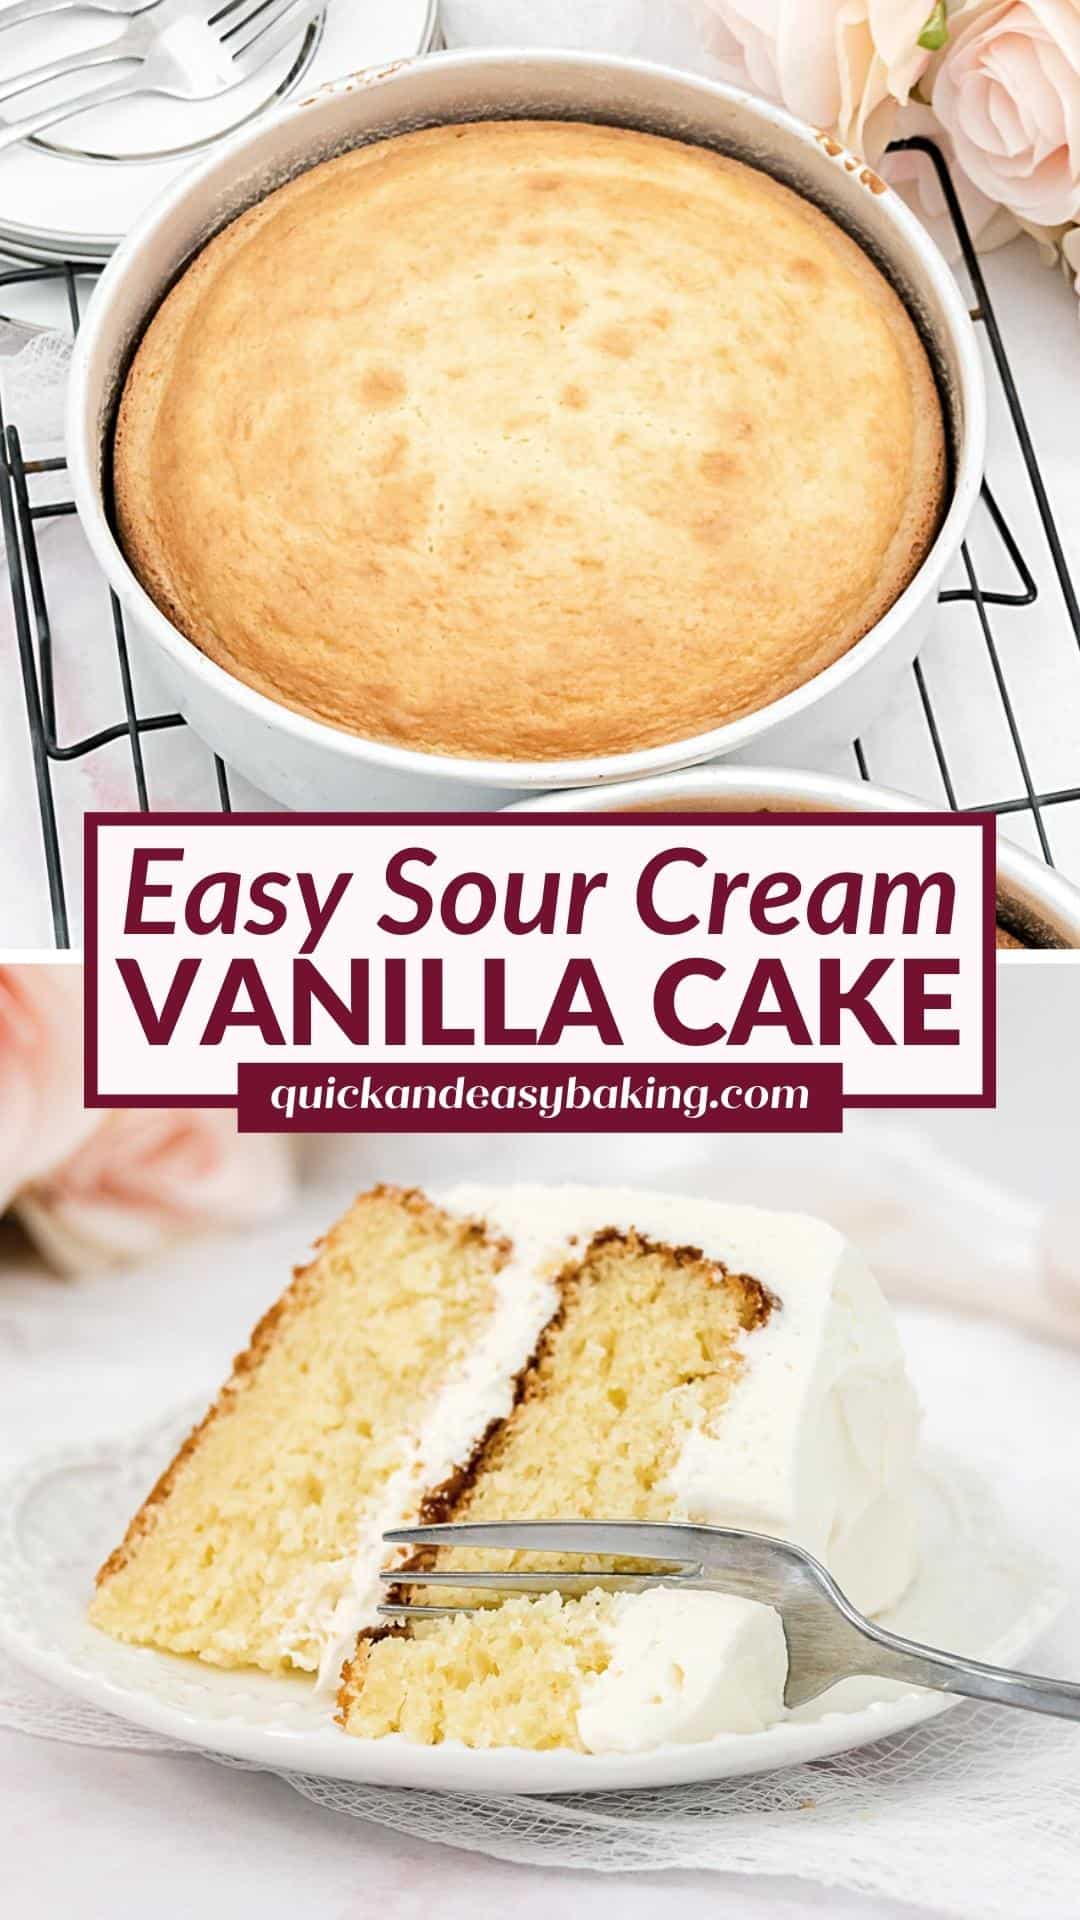 Collage of vanilla cake in a pan and a slice on a plate with text.